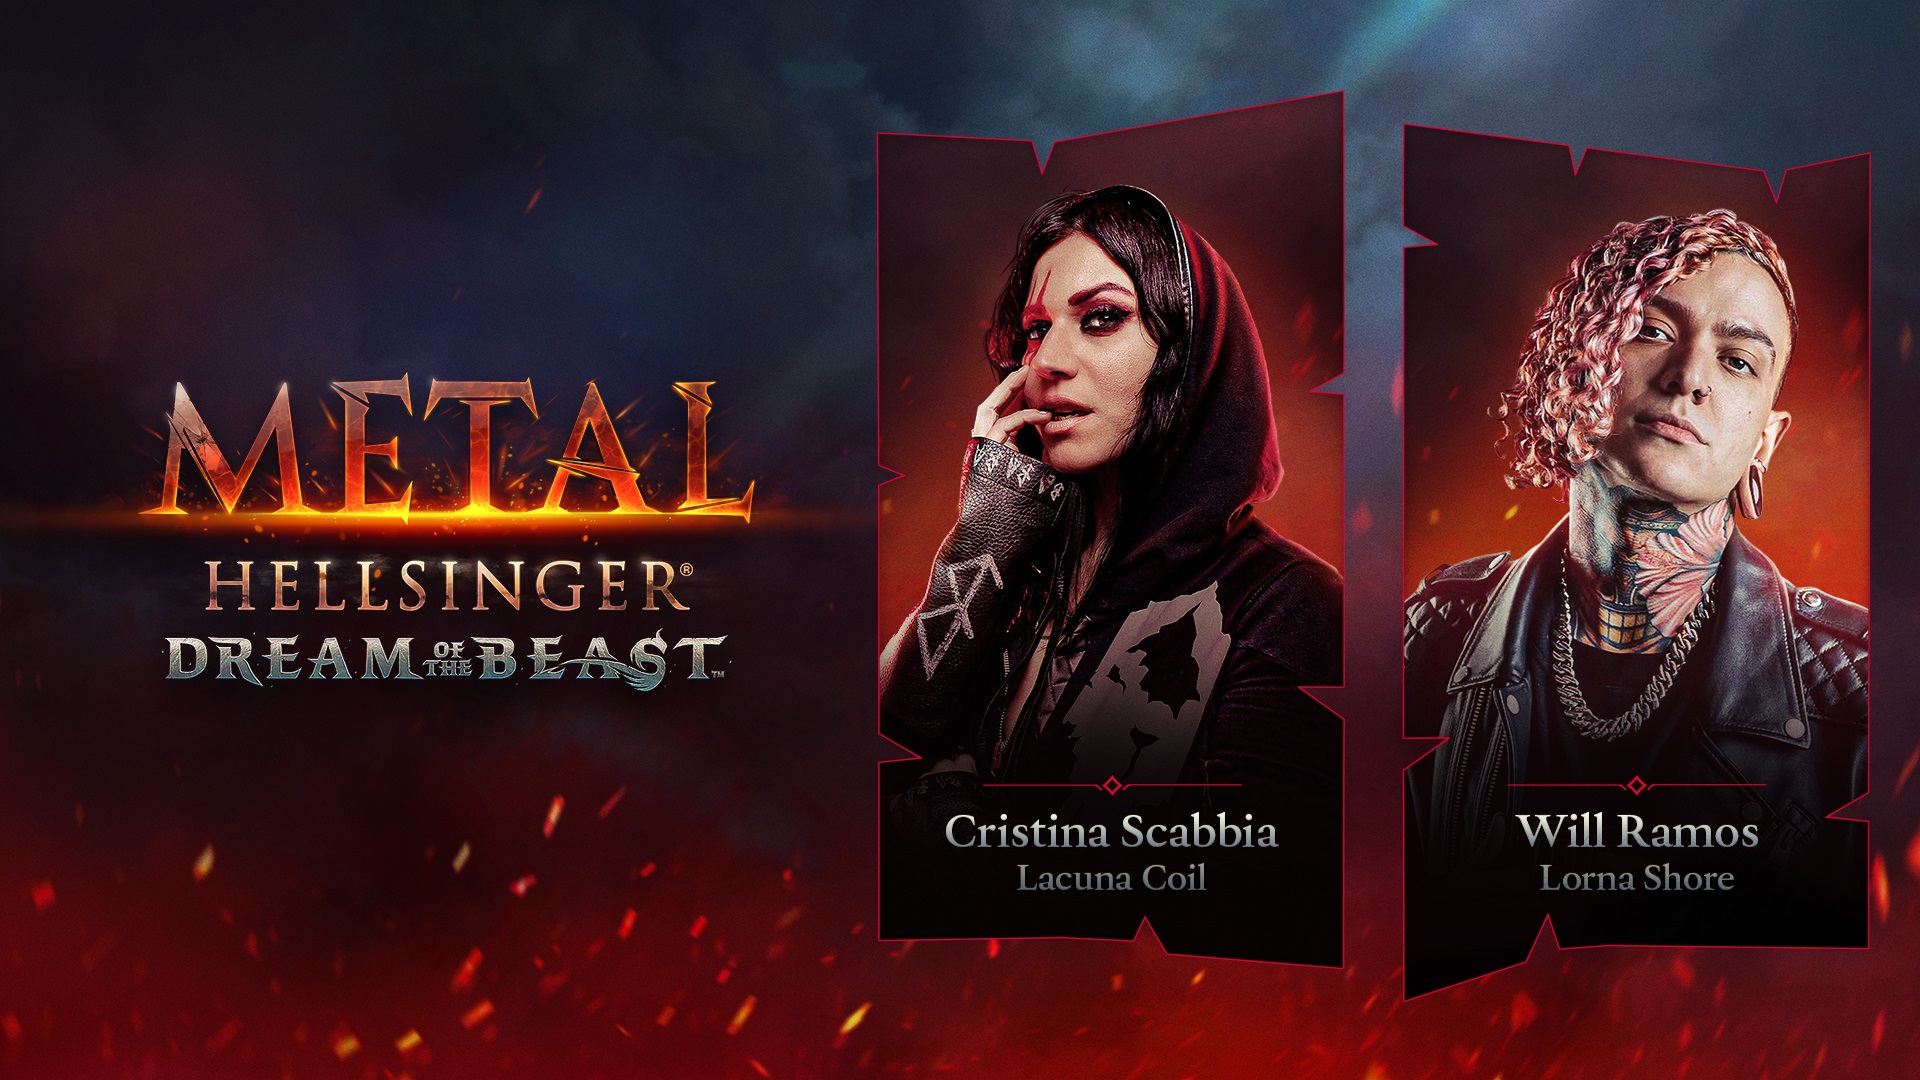 Metal: Hellsinger announces first DLC adding Cristina Scabbia and Will Ramos